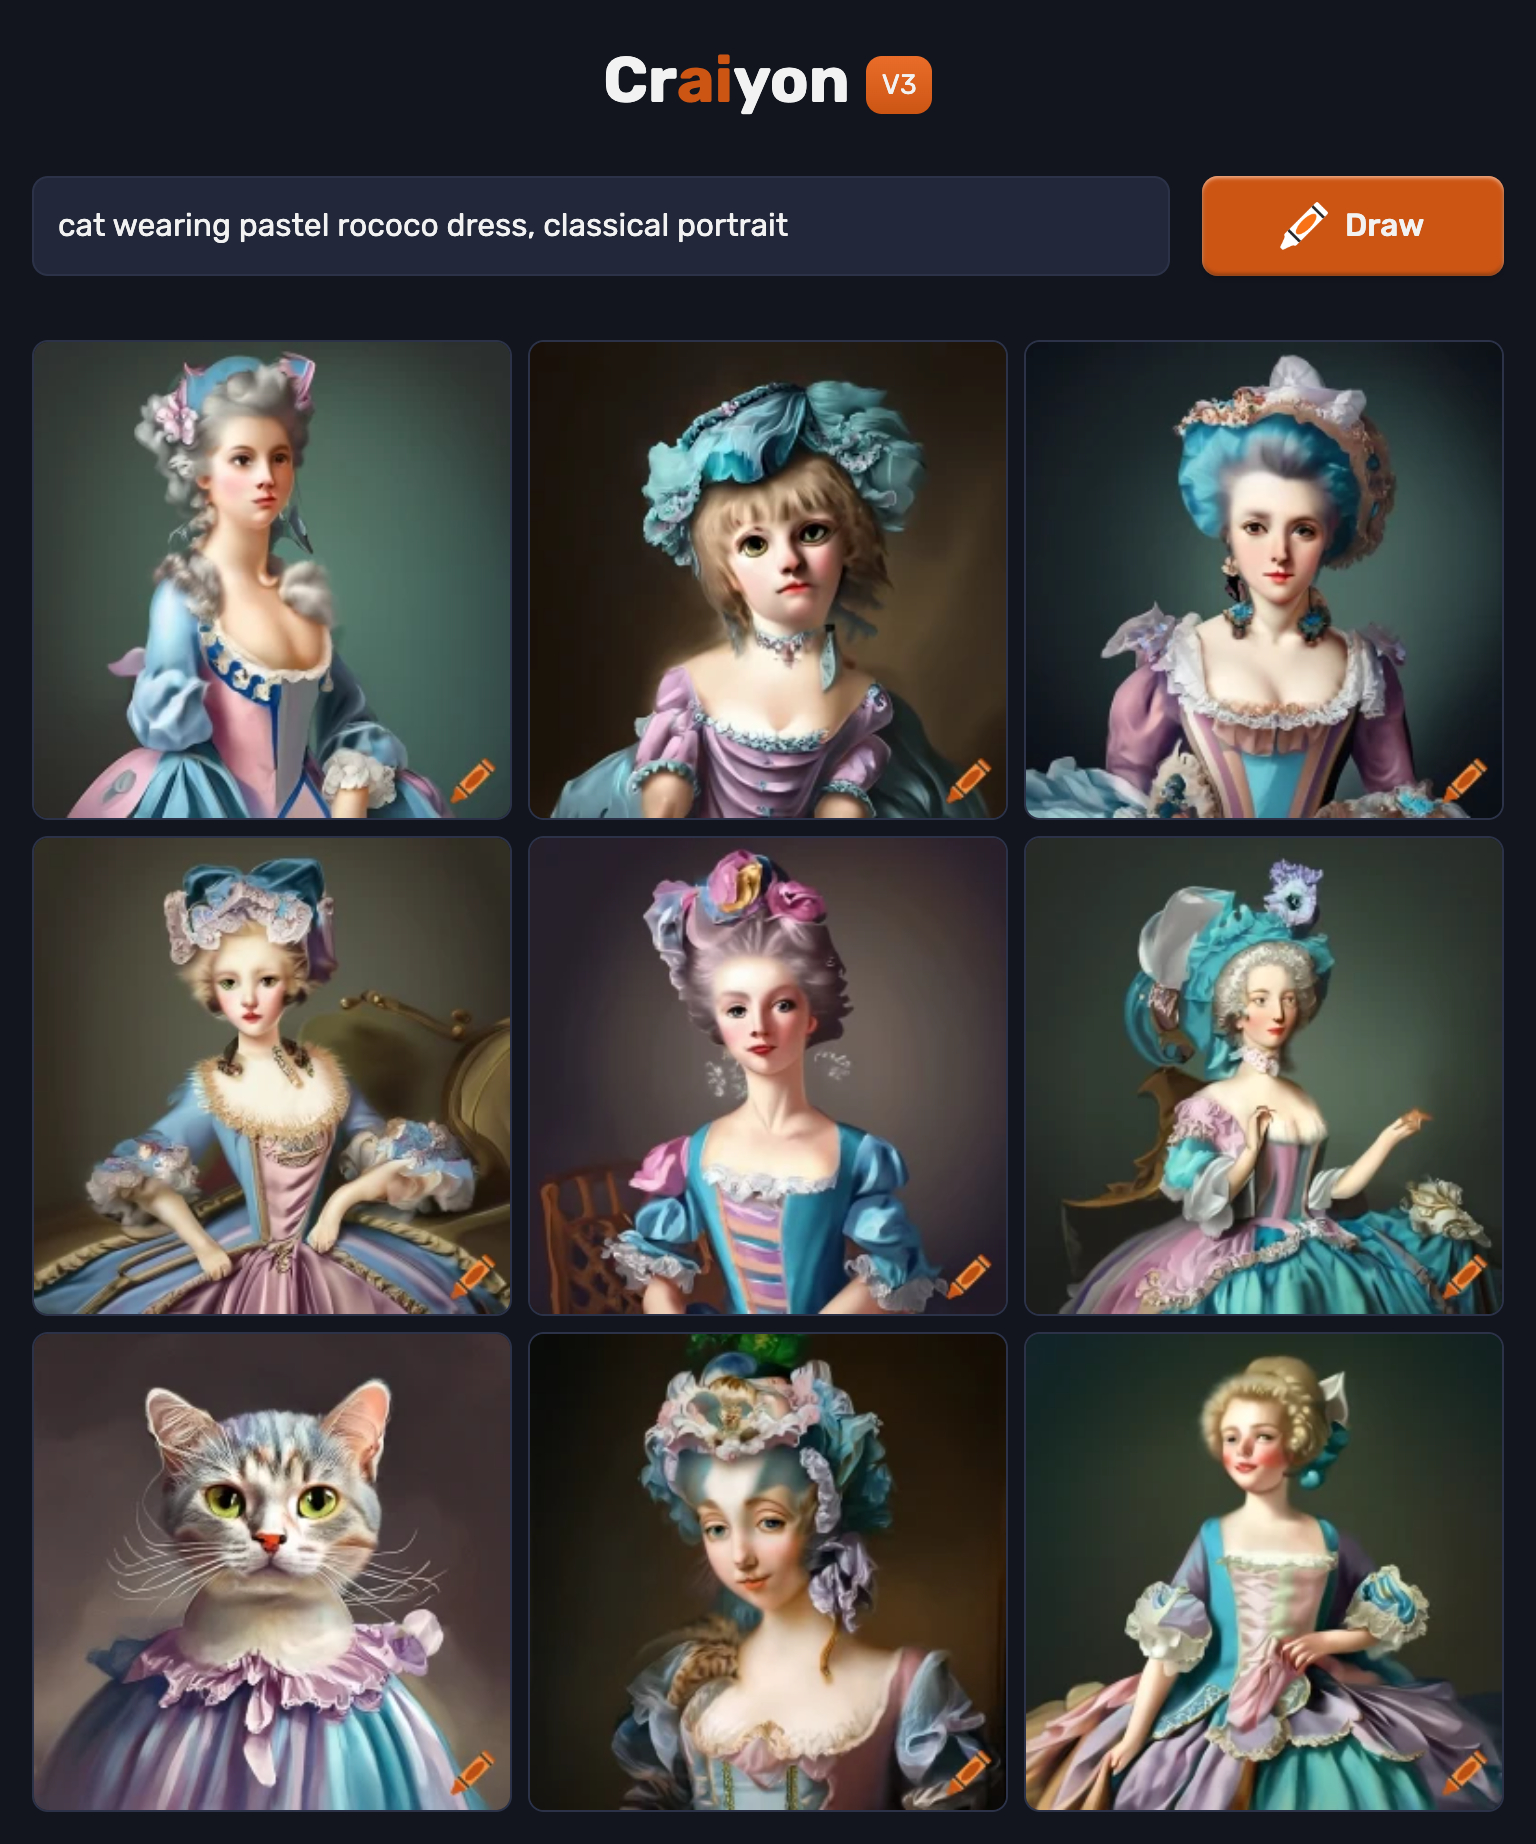 Screenshot image of the Crayon AI image generator's results when asked generate cats wearing pastel rococo gowns